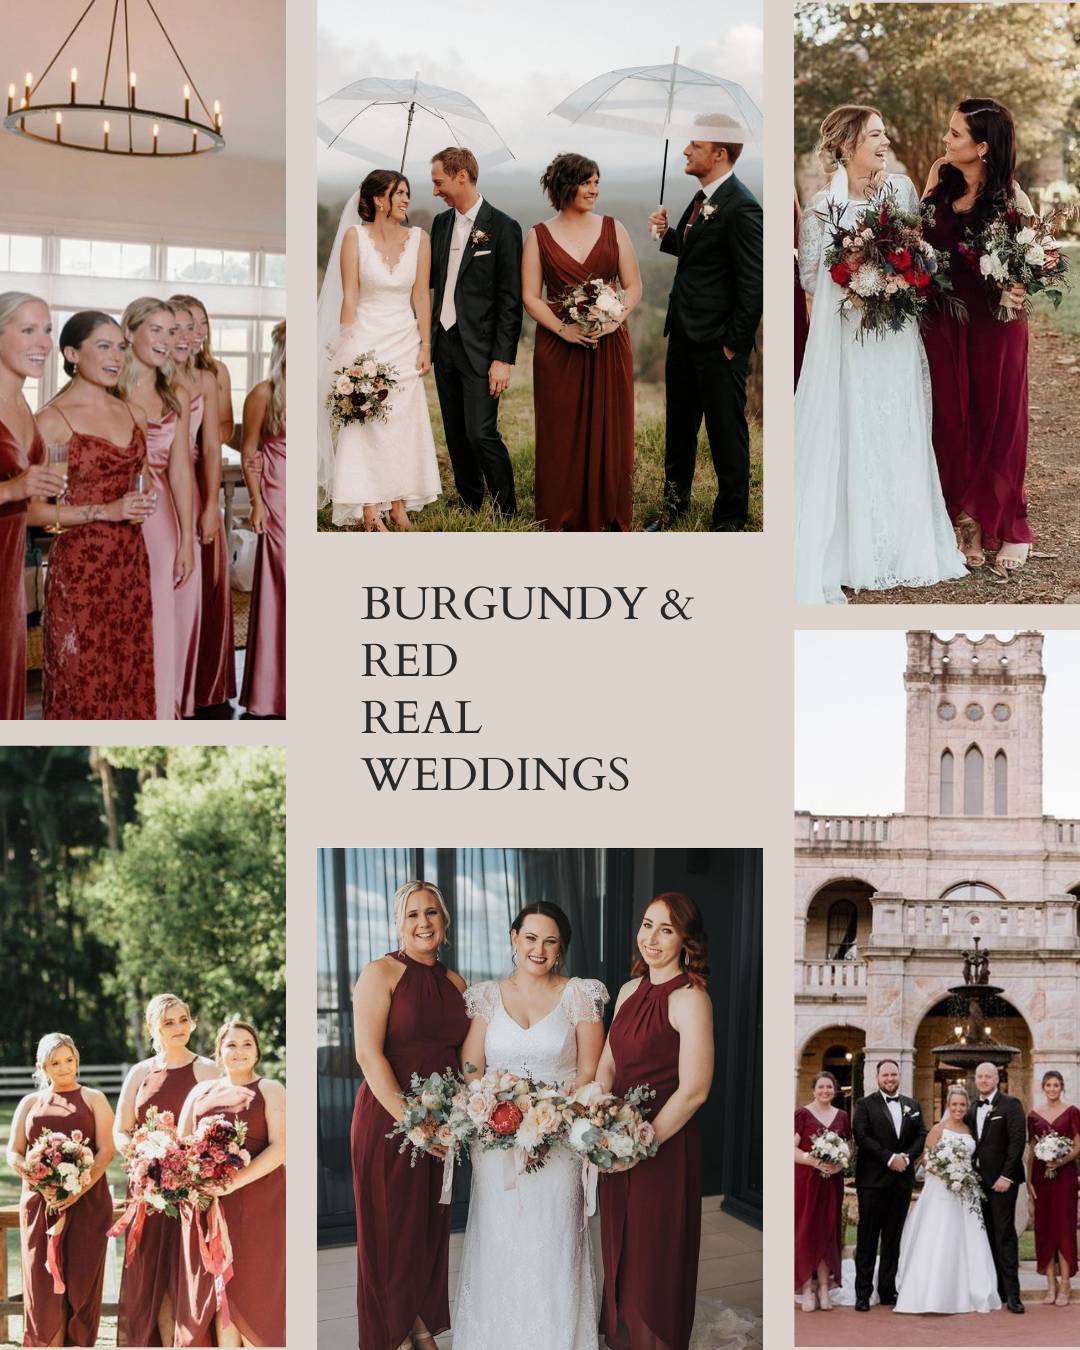 real wedding inspiration for red and burgundy bridesmaid dresses in Australia